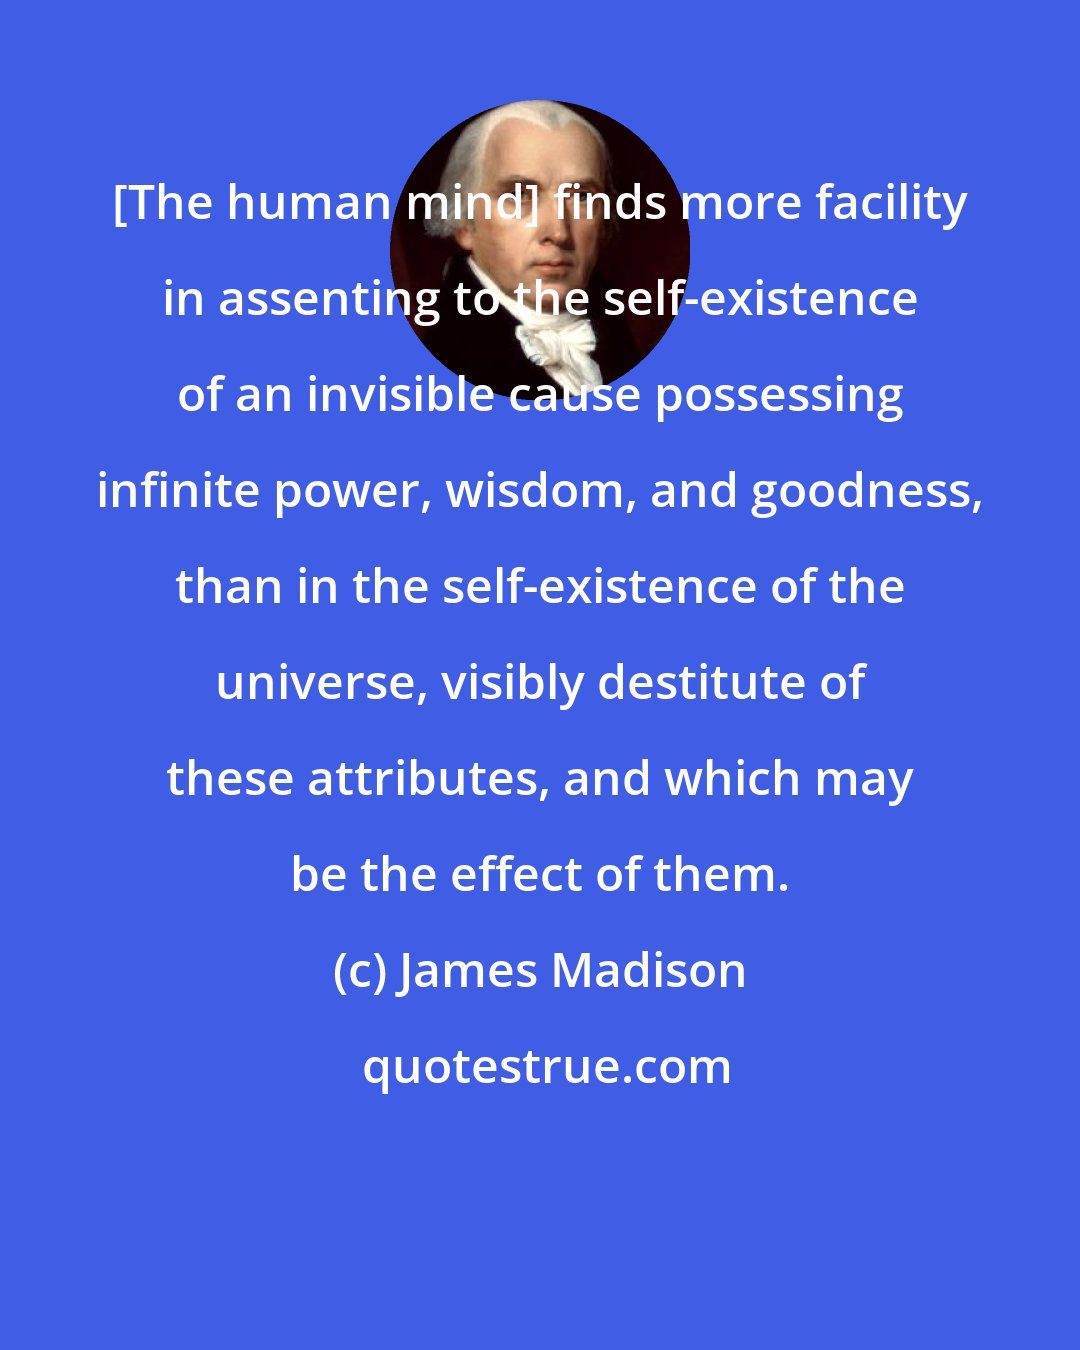 James Madison: [The human mind] finds more facility in assenting to the self-existence of an invisible cause possessing infinite power, wisdom, and goodness, than in the self-existence of the universe, visibly destitute of these attributes, and which may be the effect of them.